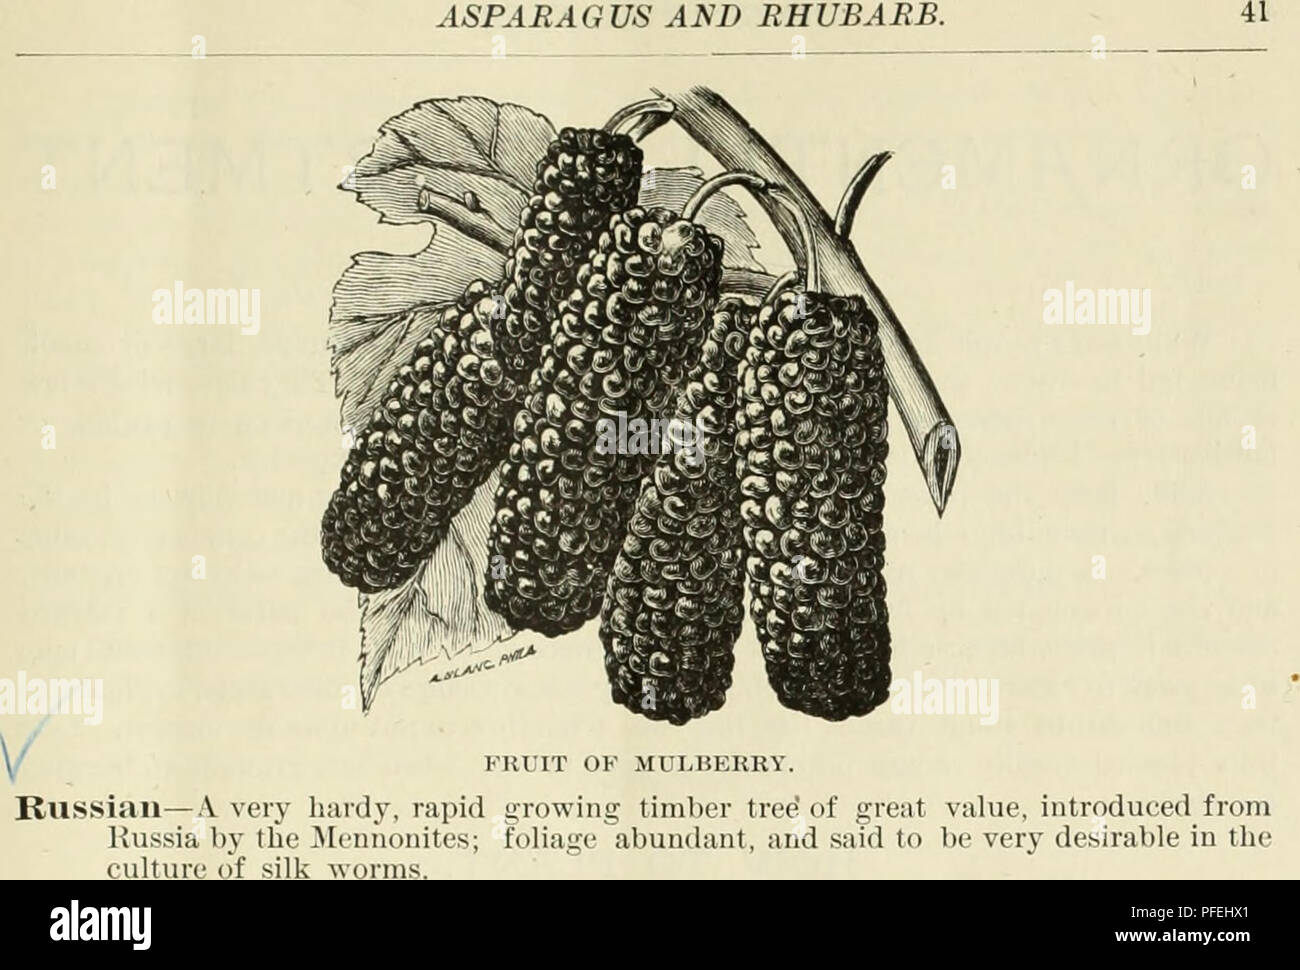 . Descriptive catalogue of fruit and ornamental trees grapes, roses, shrubs, etc., etc.. Fruit trees Catalogs; Ornamental trees Catalogs; Climbing plants Catalogs; Nursery stock Catalogs. ASPARAGUS. This earliest and finest of spring vegetables is among the easiest cultivated and most profitable. A bed once planted suffers no deterioration for thirty years or more, if it is properly attended to and well manured. CULTIVATION. See that the ground is well drained, naturally or otherwise; work it up tine and deep and make it very rich with well rotted barn-yard manure. Locate the plants eight inch Stock Photo